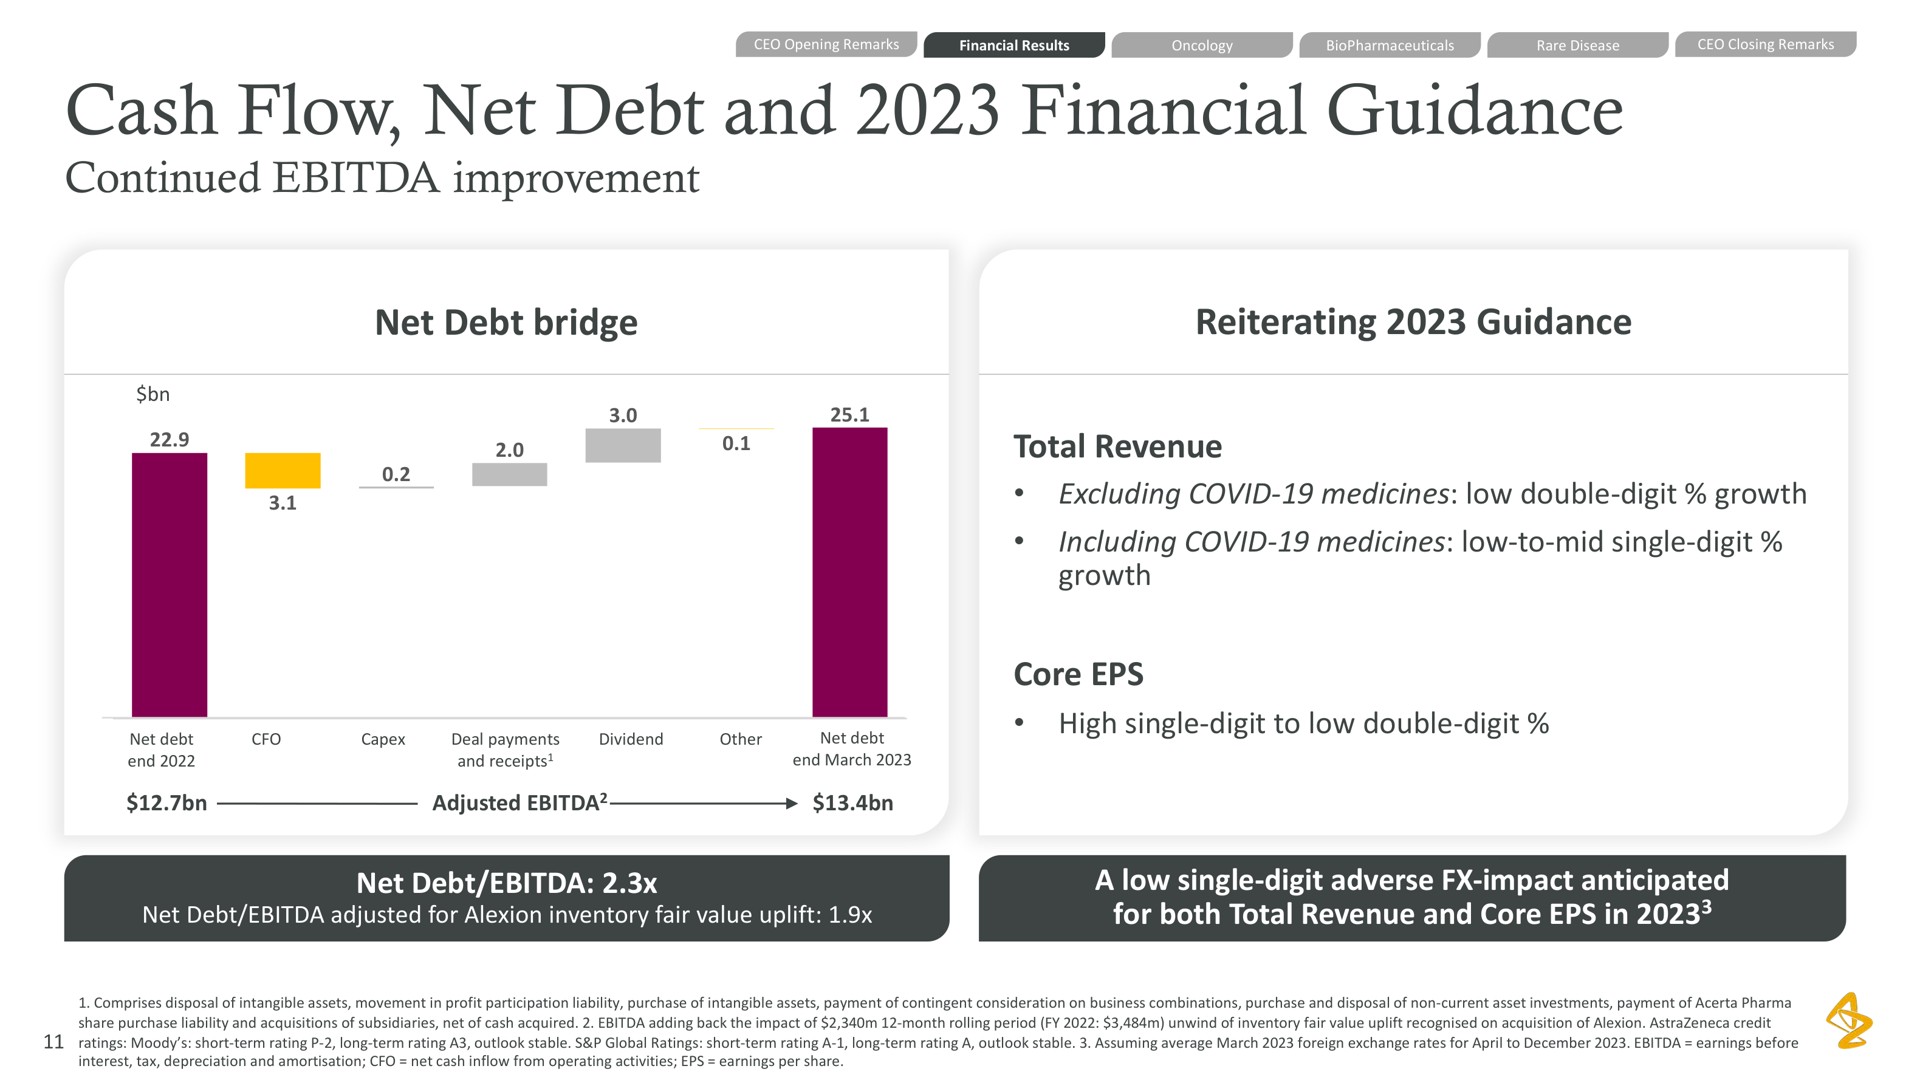 cash flow net debt and financial guidance continued improvement net debt bridge reiterating guidance total revenue excluding covid medicines low double digit growth including covid medicines low to mid single digit growth core high single digit to low double digit net debt a low single digit adverse impact anticipated for both total revenue and core in | AstraZeneca